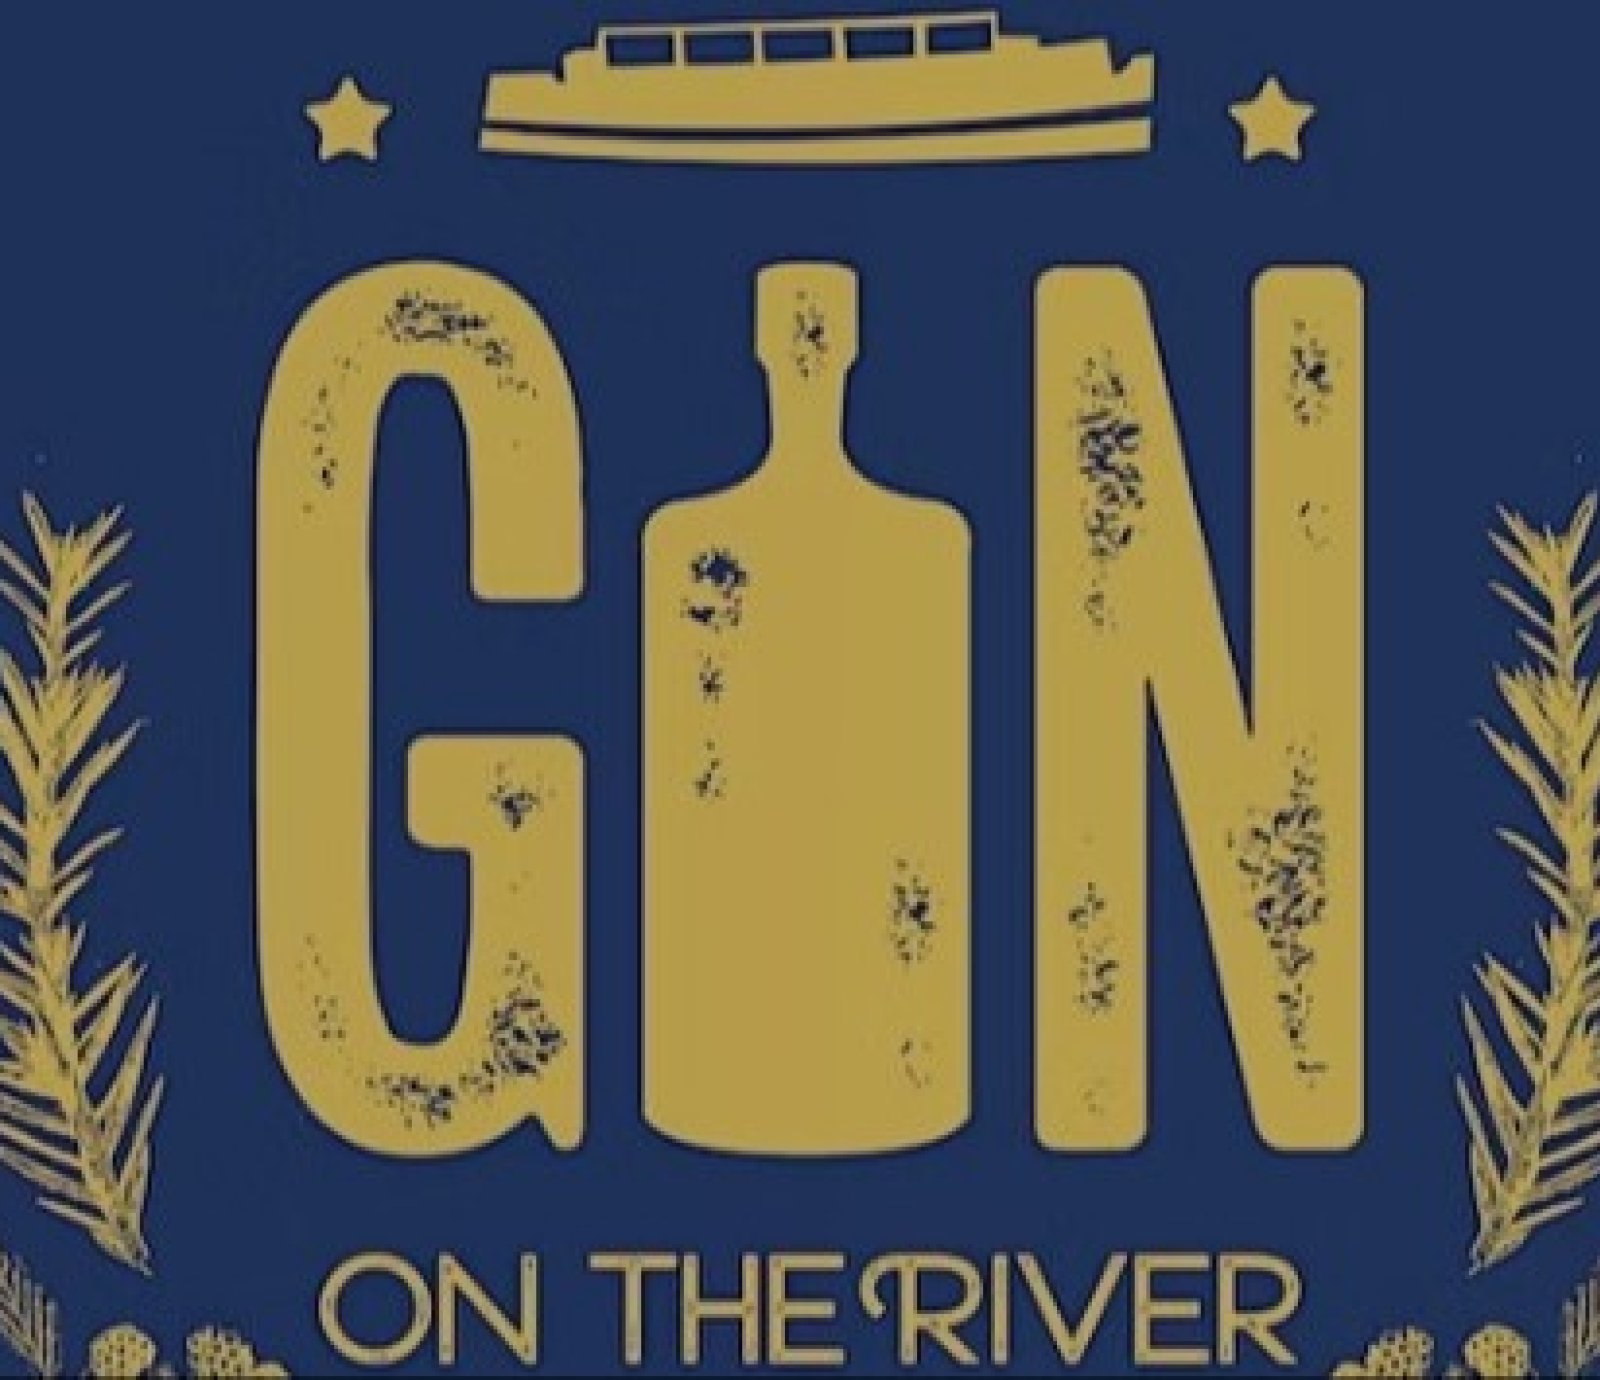 Gin on the River London